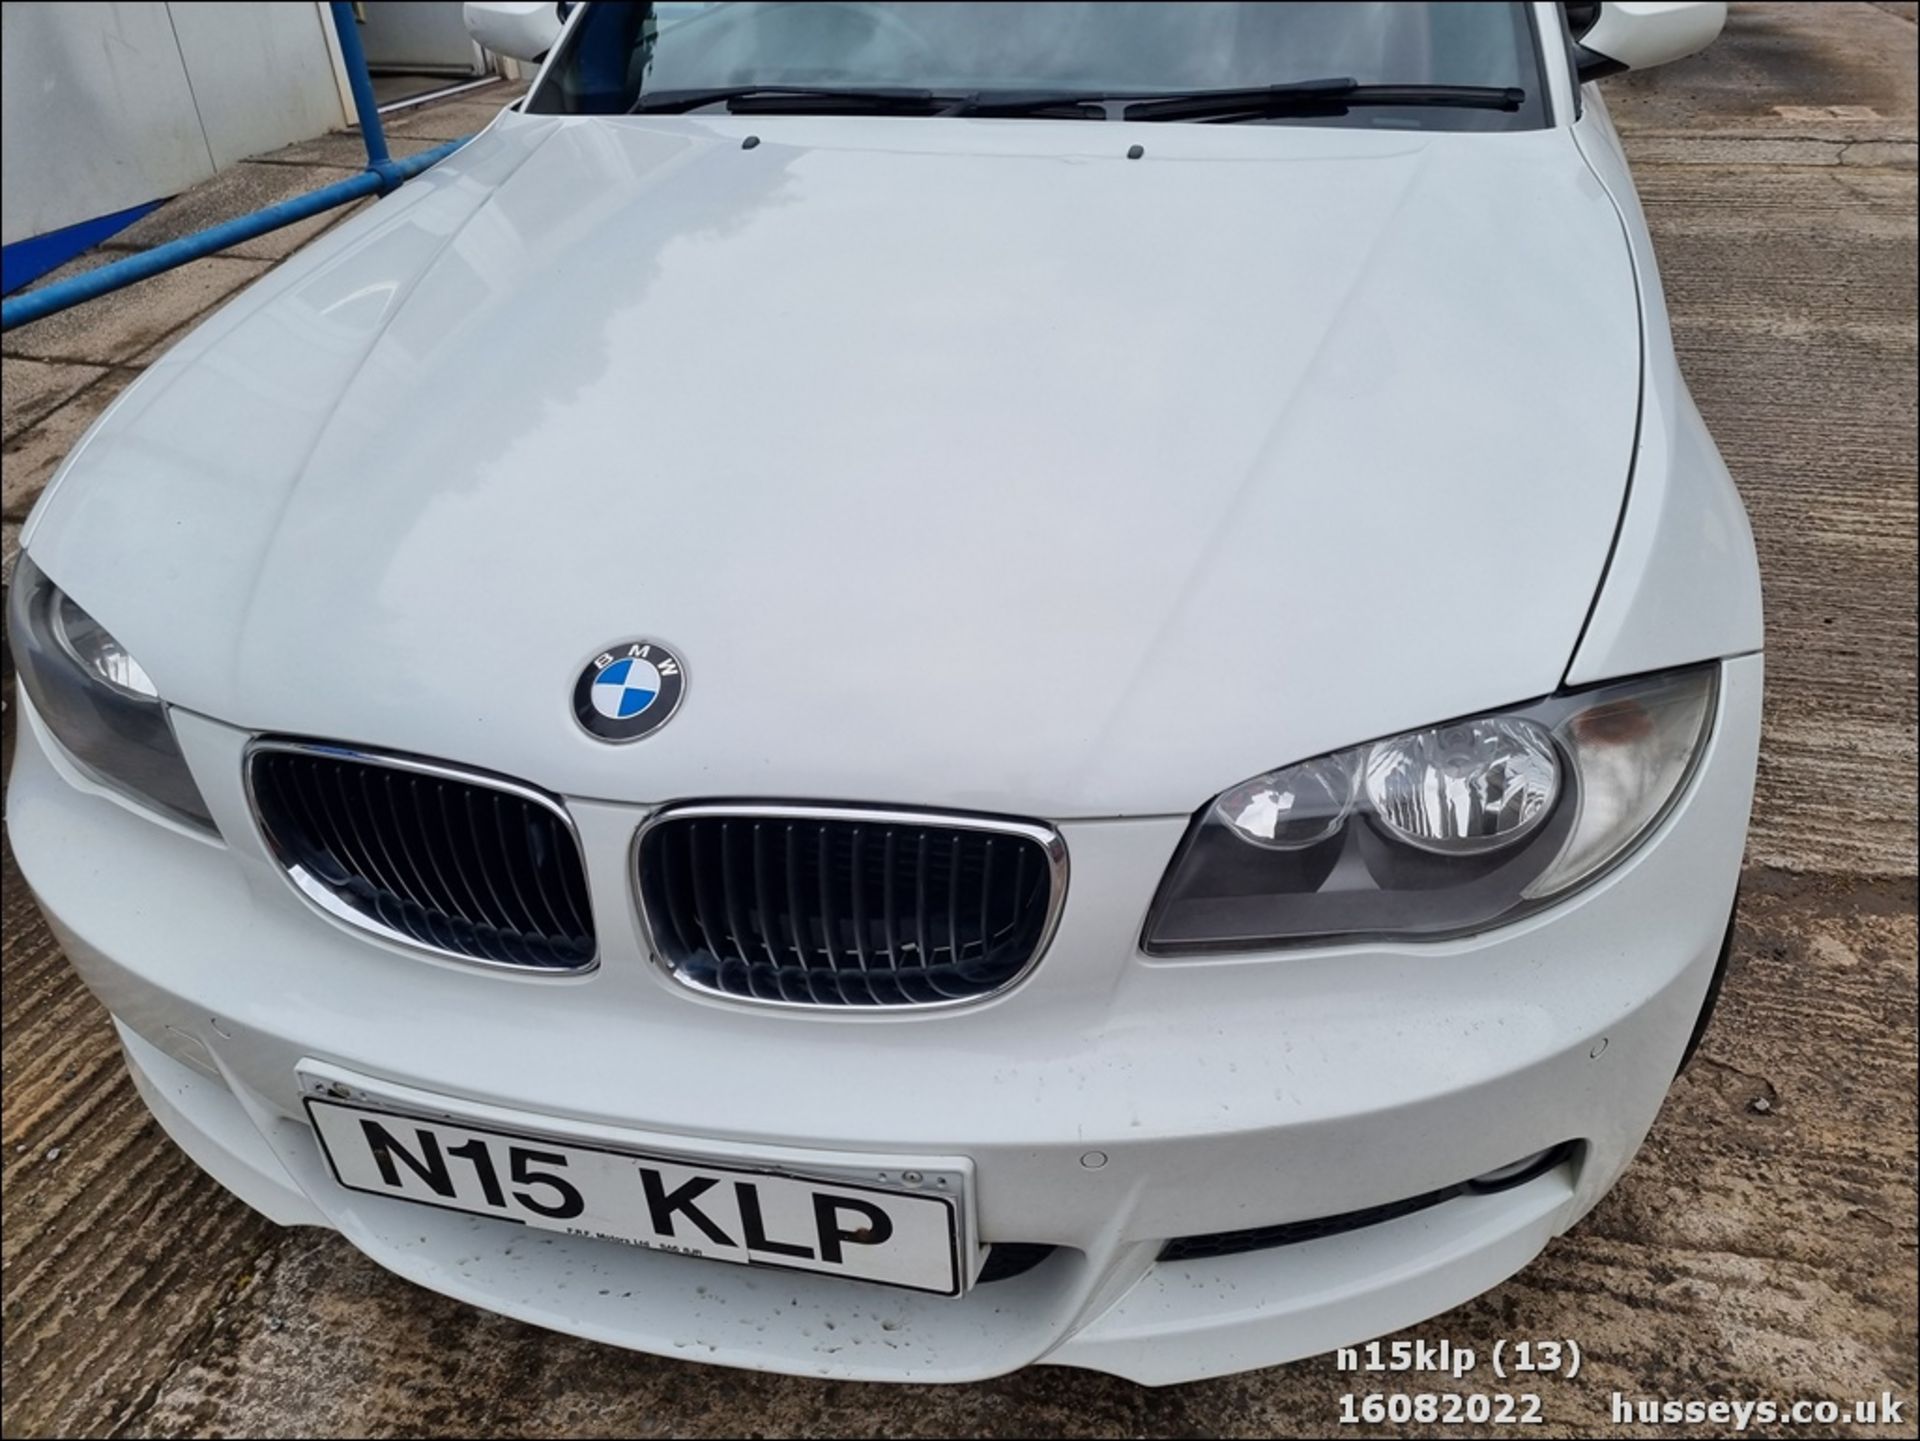 2008 BMW 118I M SPORT - 1995cc 2dr Convertible (White, 97k) - Image 13 of 19